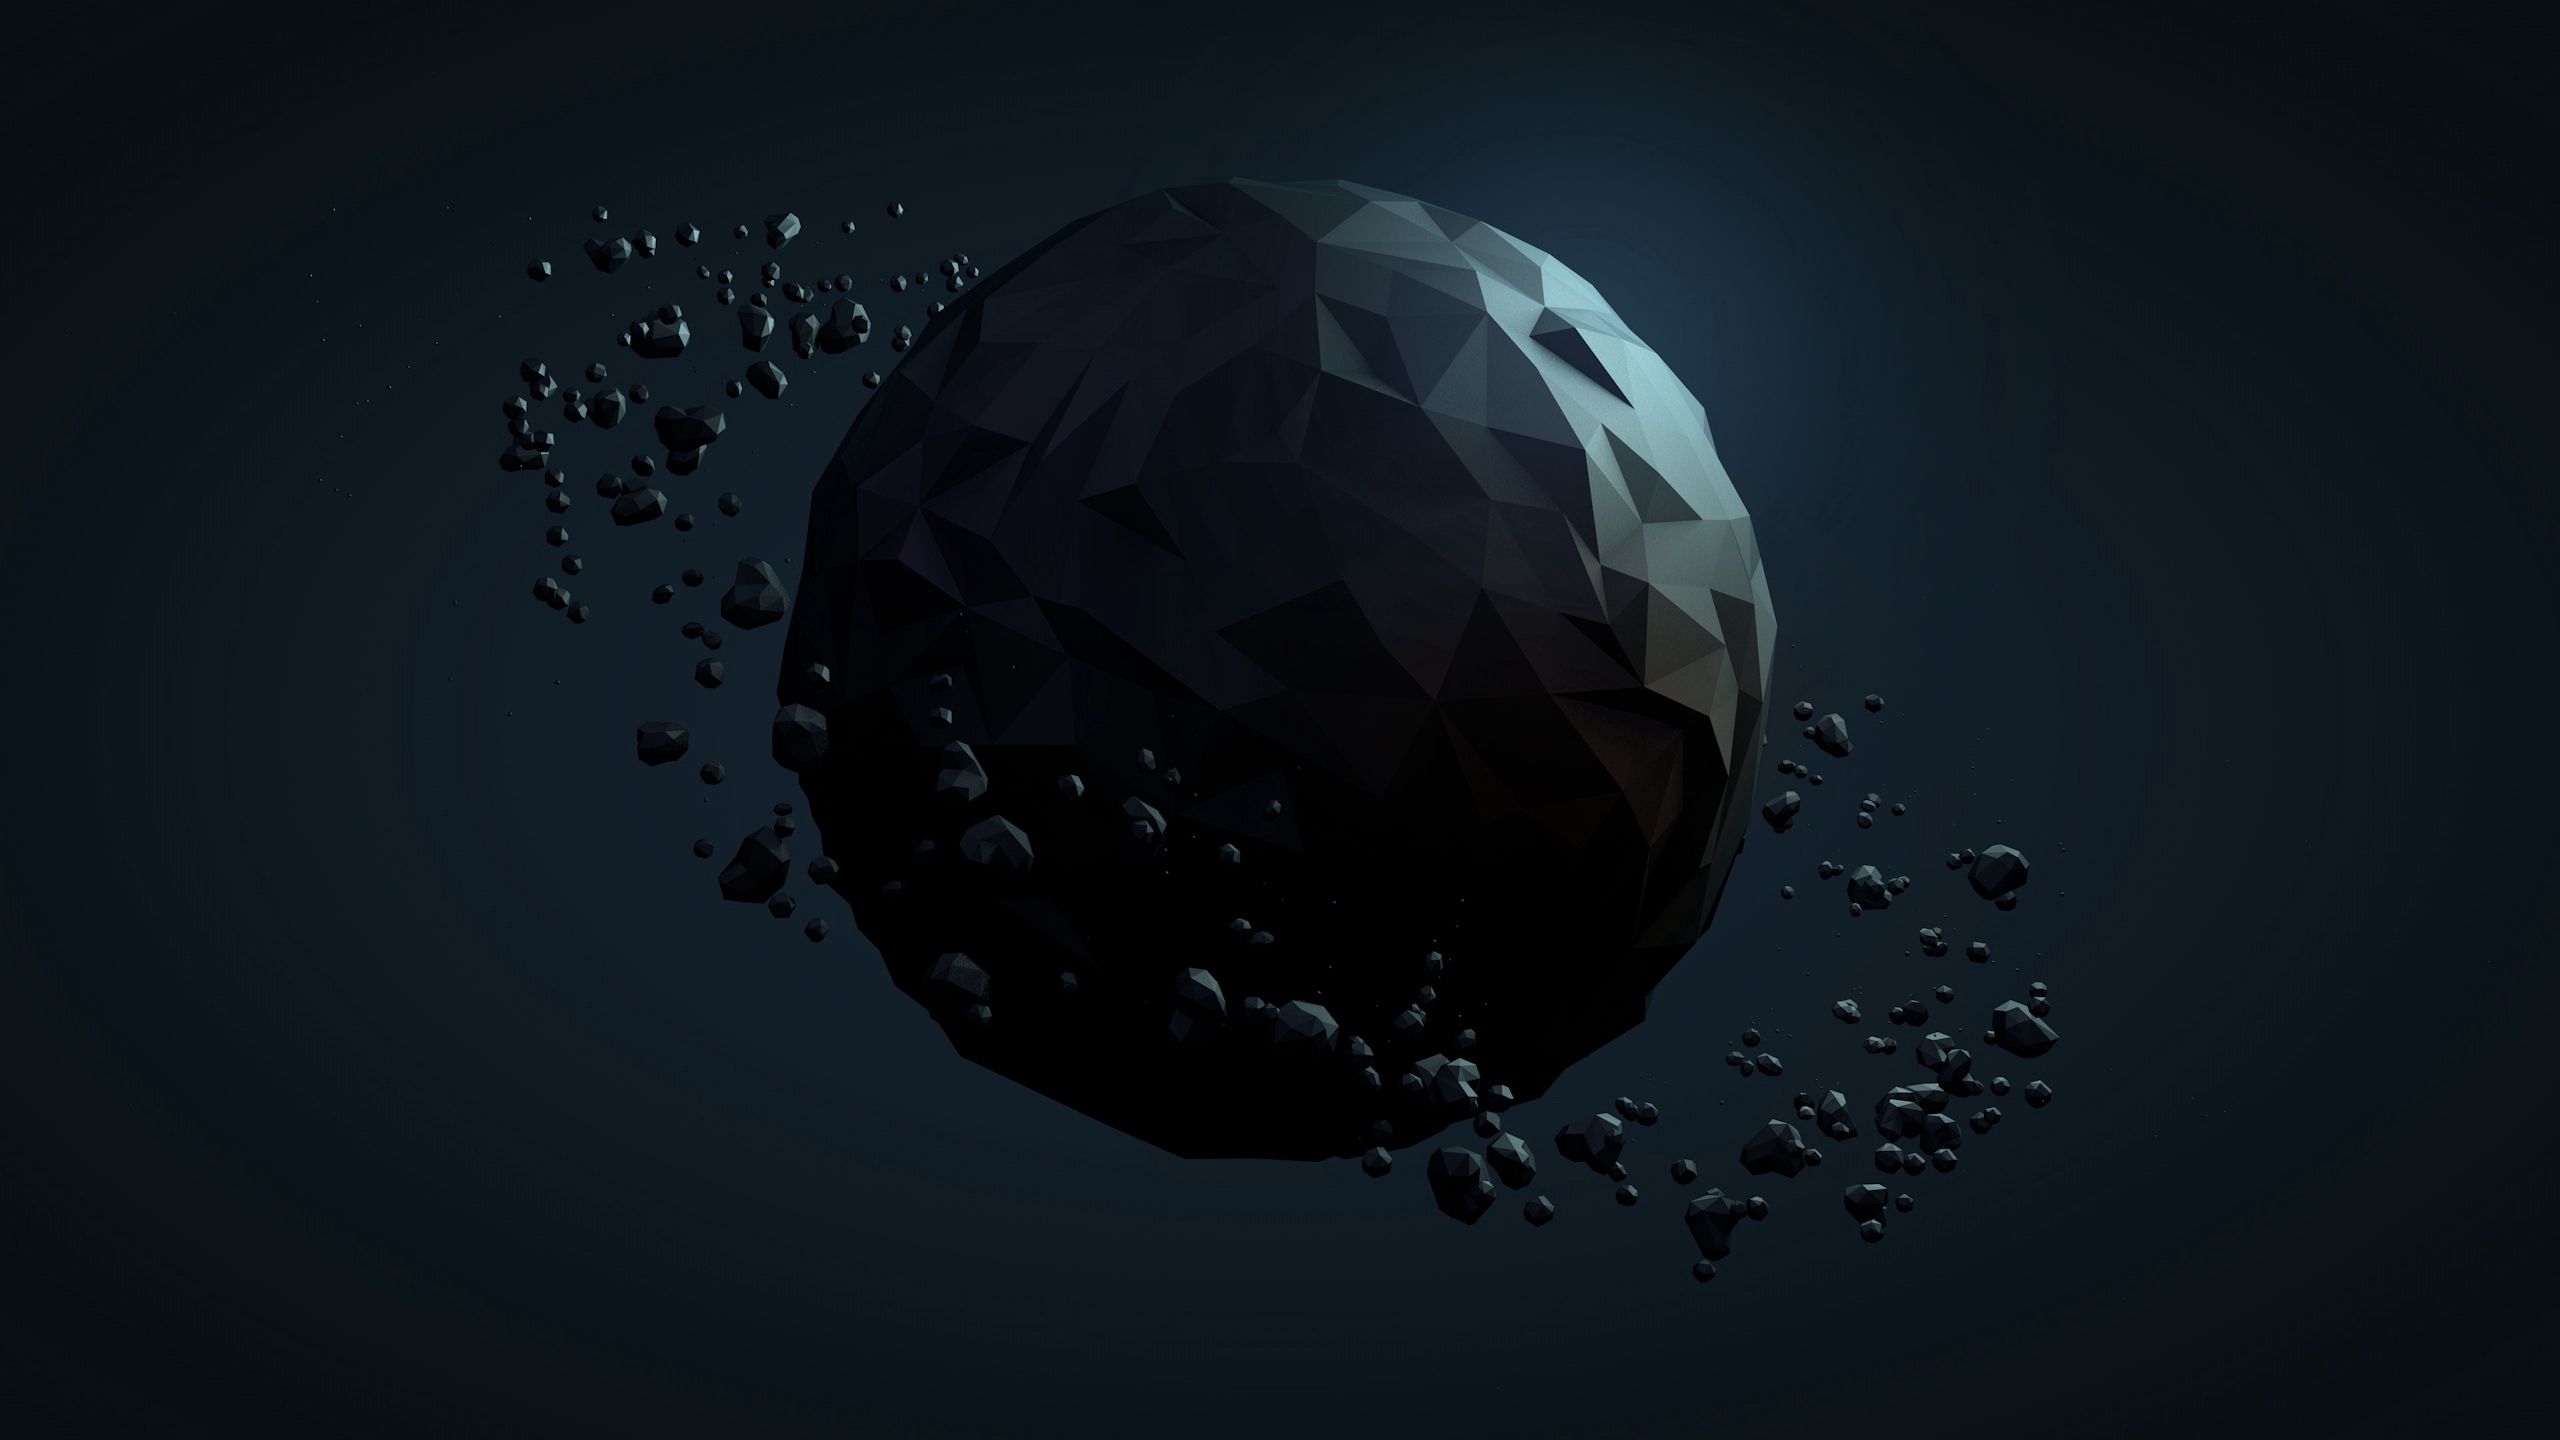 planet, dark, abstract, background, ball cellphone